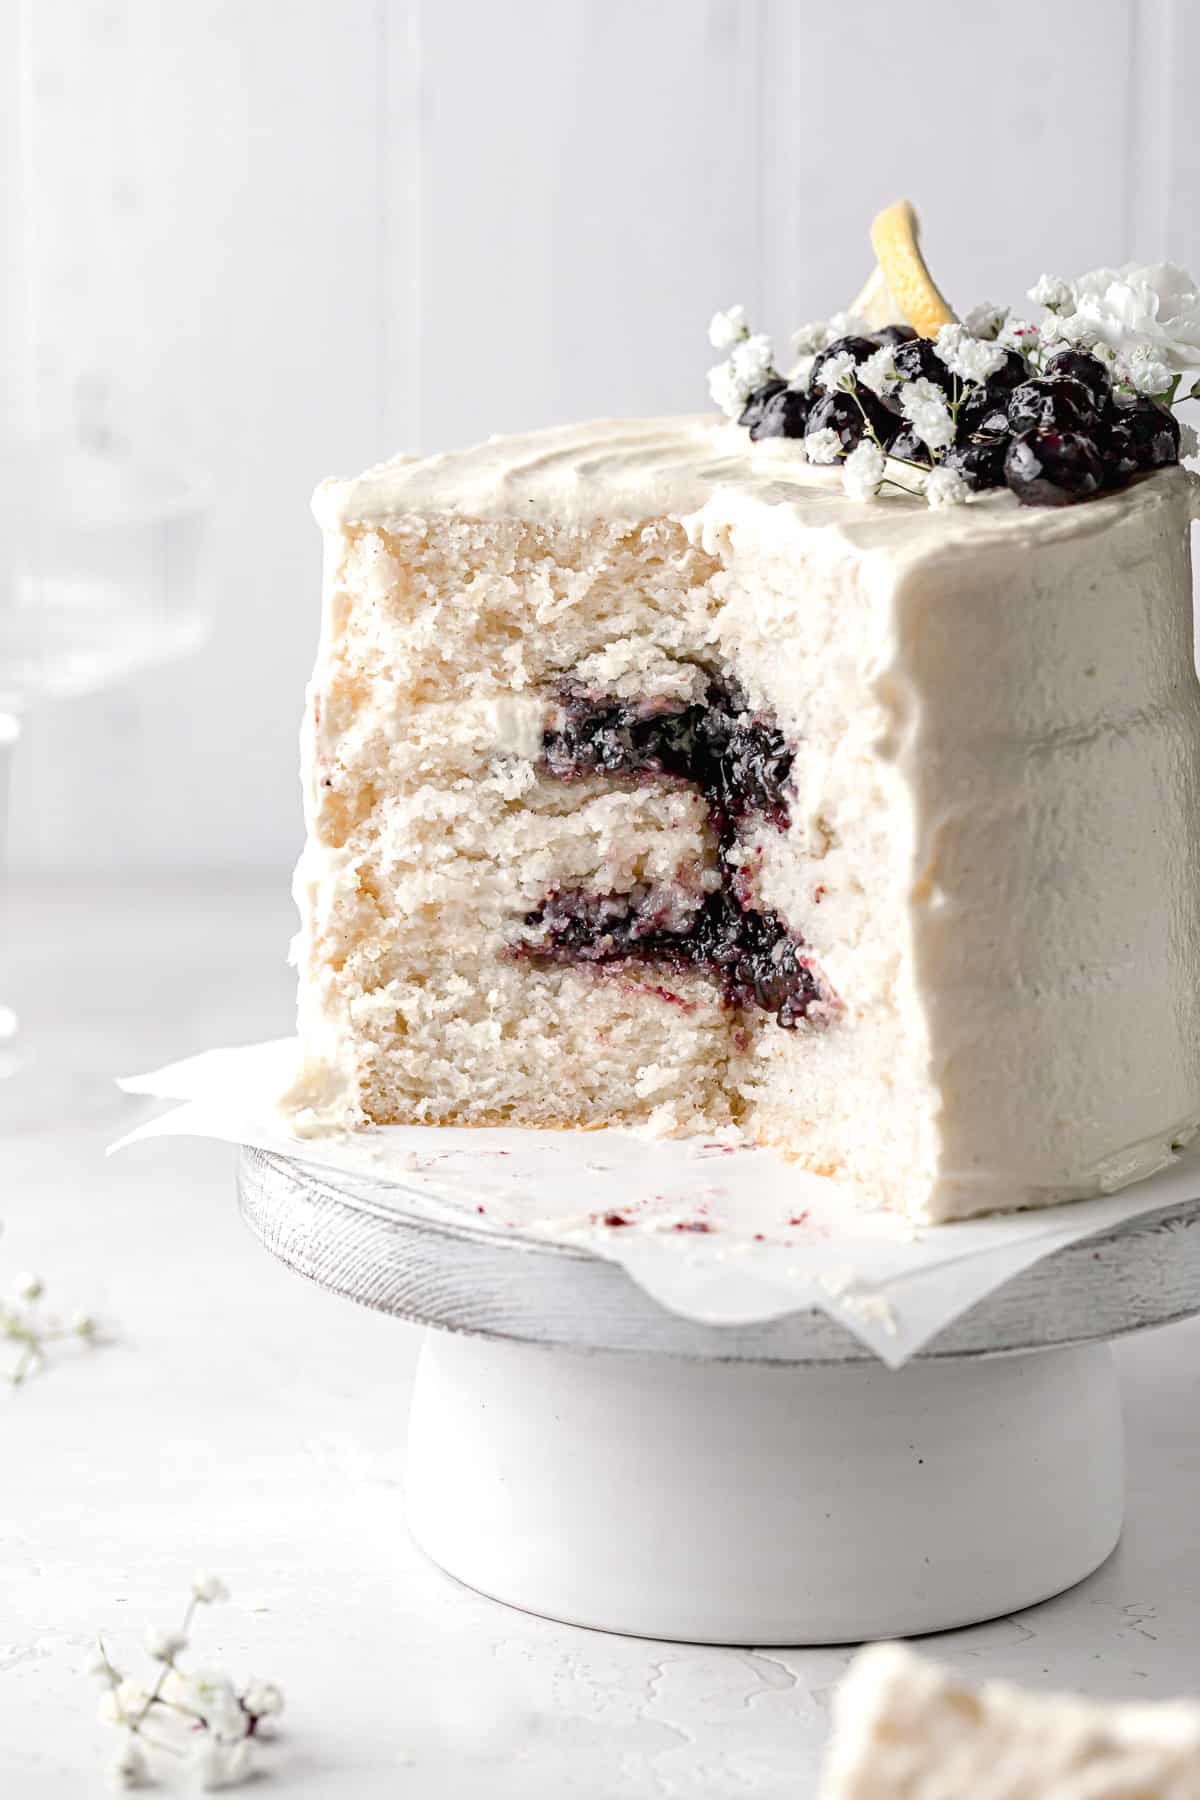 lemon blueberry jam cake on cake stand with several slices taken out to reveal inside.